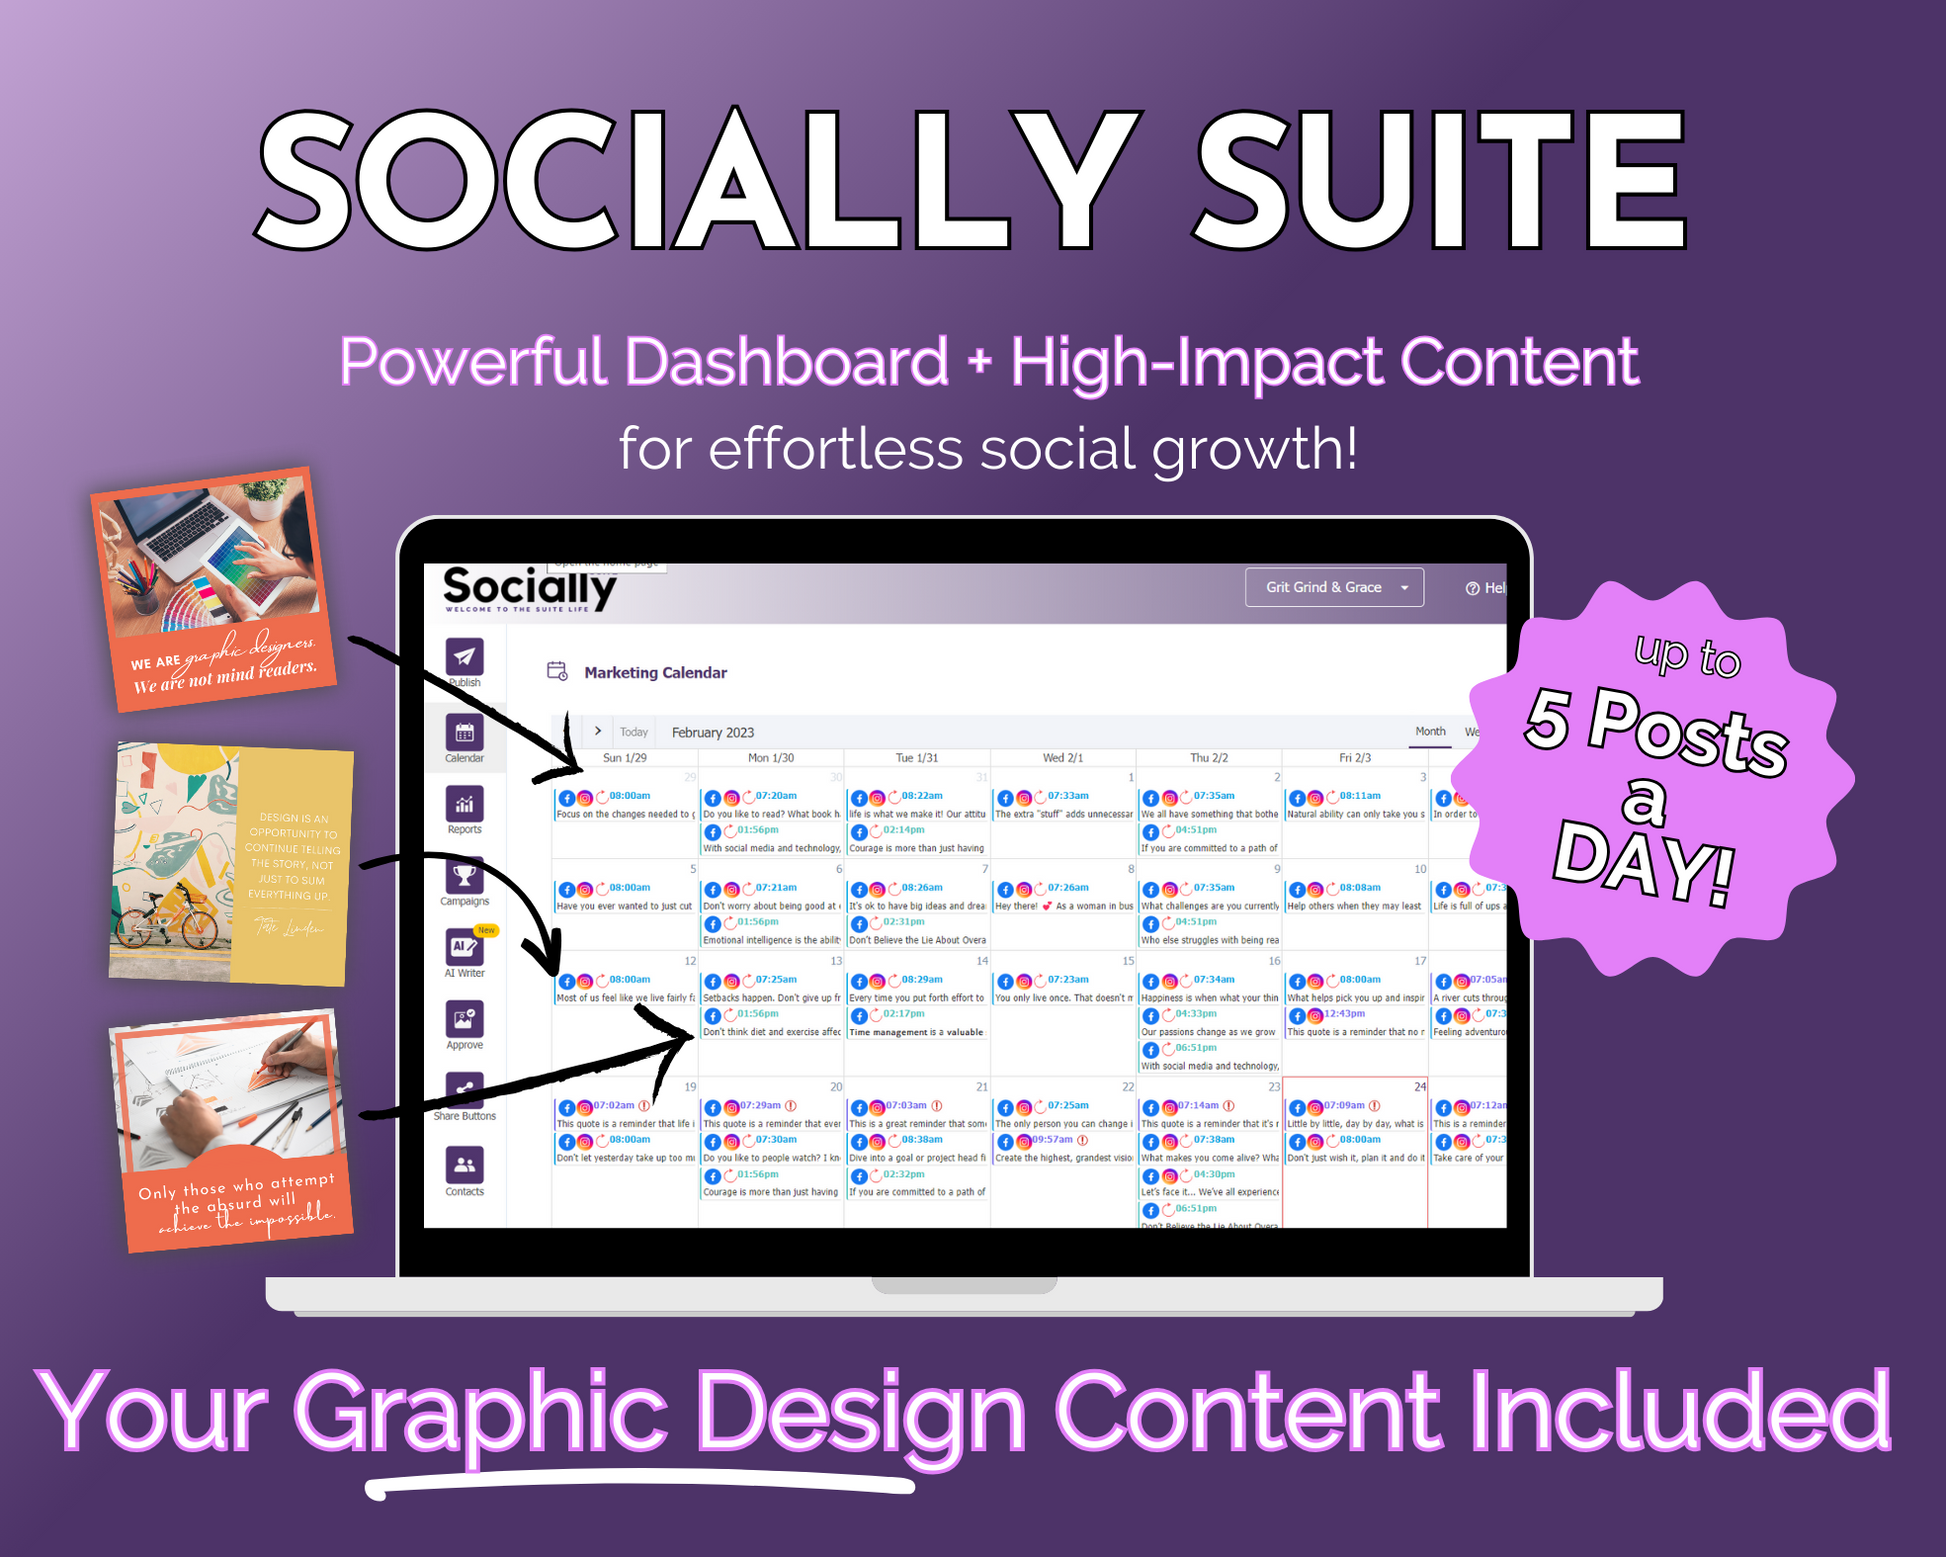 Get Socially Inclined's Socially Suite Membership offers a powerful content management tool for optimizing your online presence and implementing effective social media marketing strategies. This comprehensive dashboard includes high impact content to enhance Get Socially Inclined's visibility and engagement.